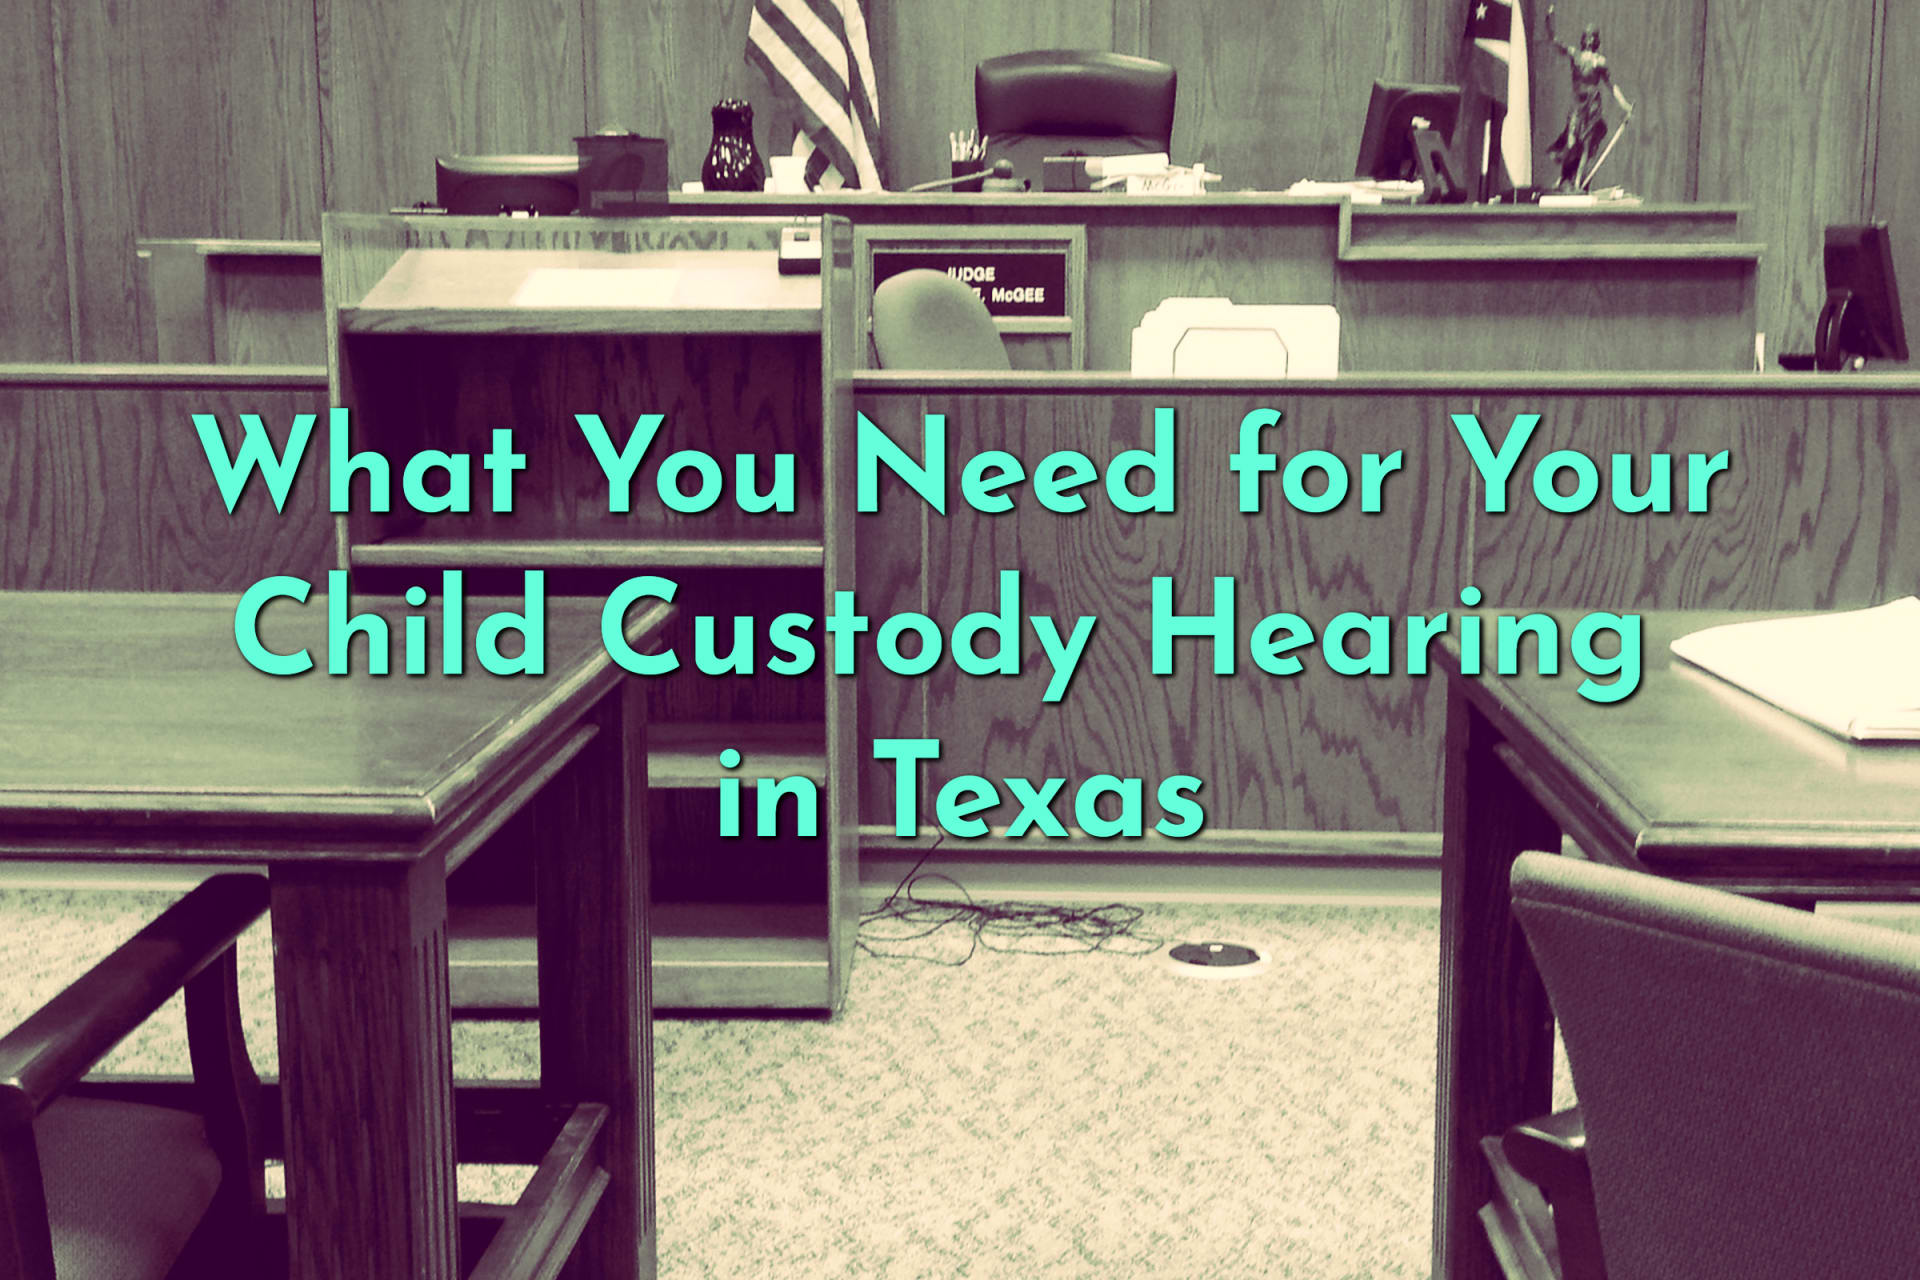 A courtroom poised for a child custody hearing in Texas